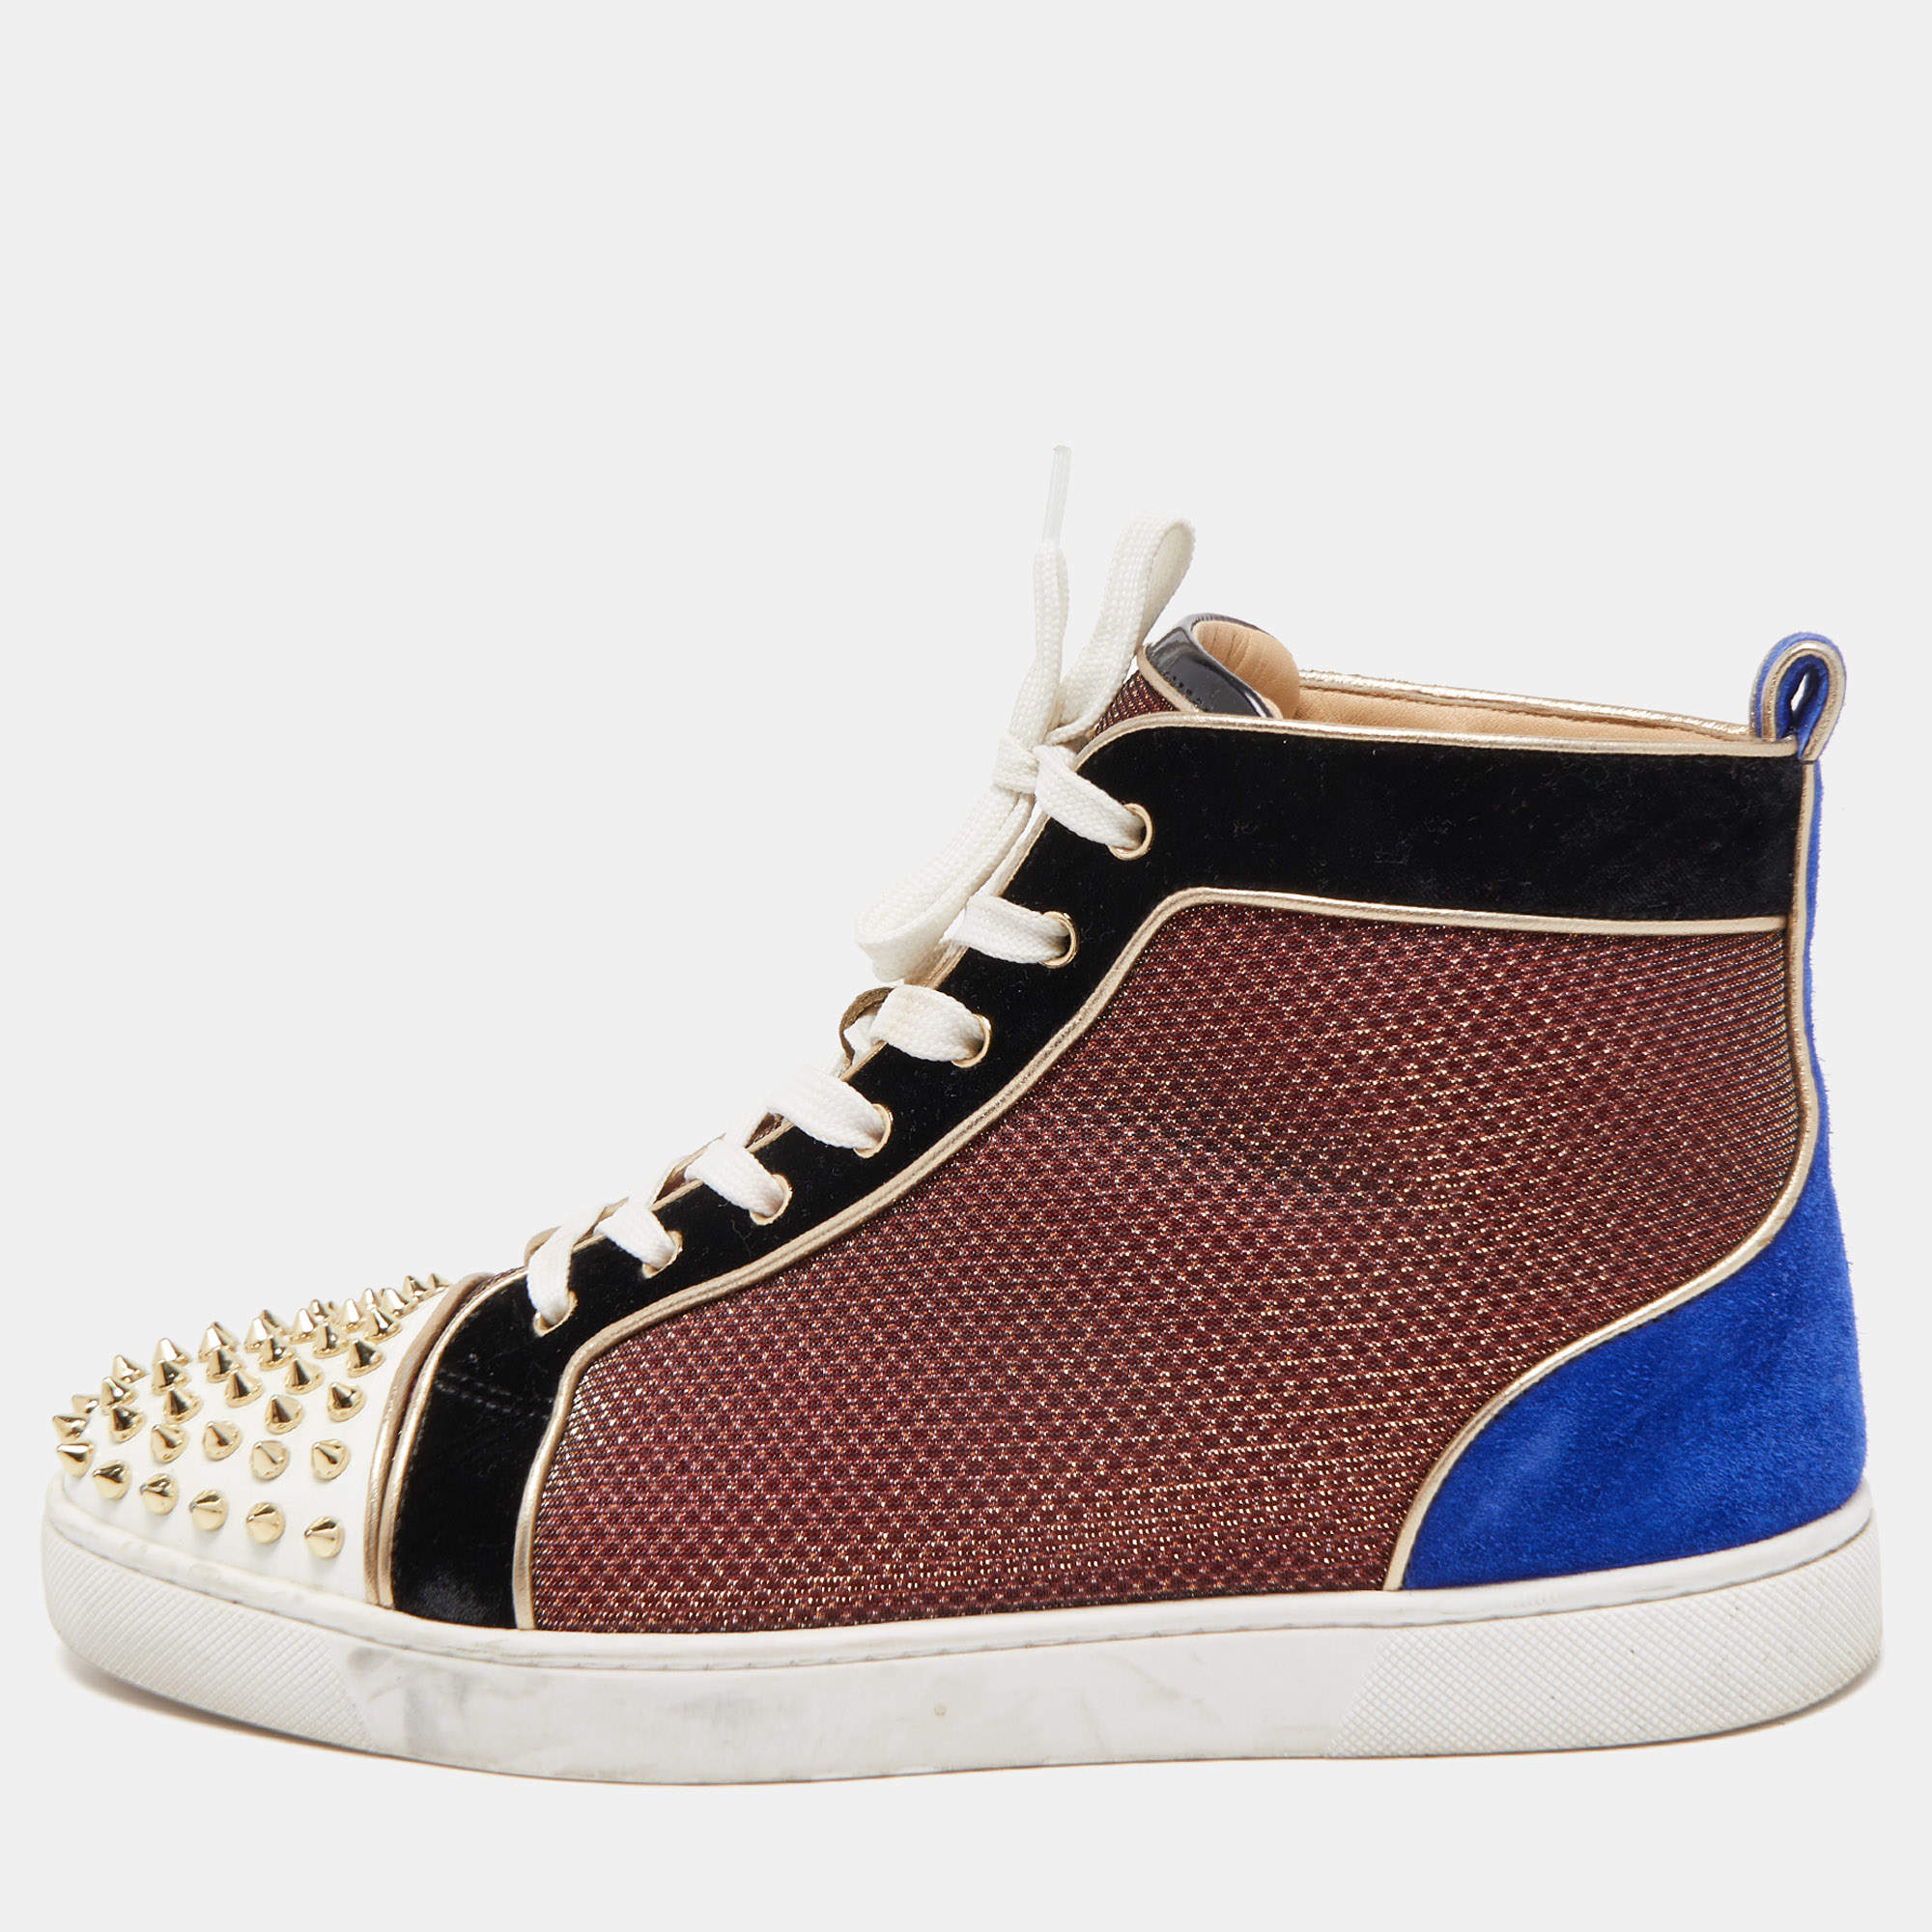 Christian Louboutin Lou Spikes 2 Patent High Top Sneaker Size 43